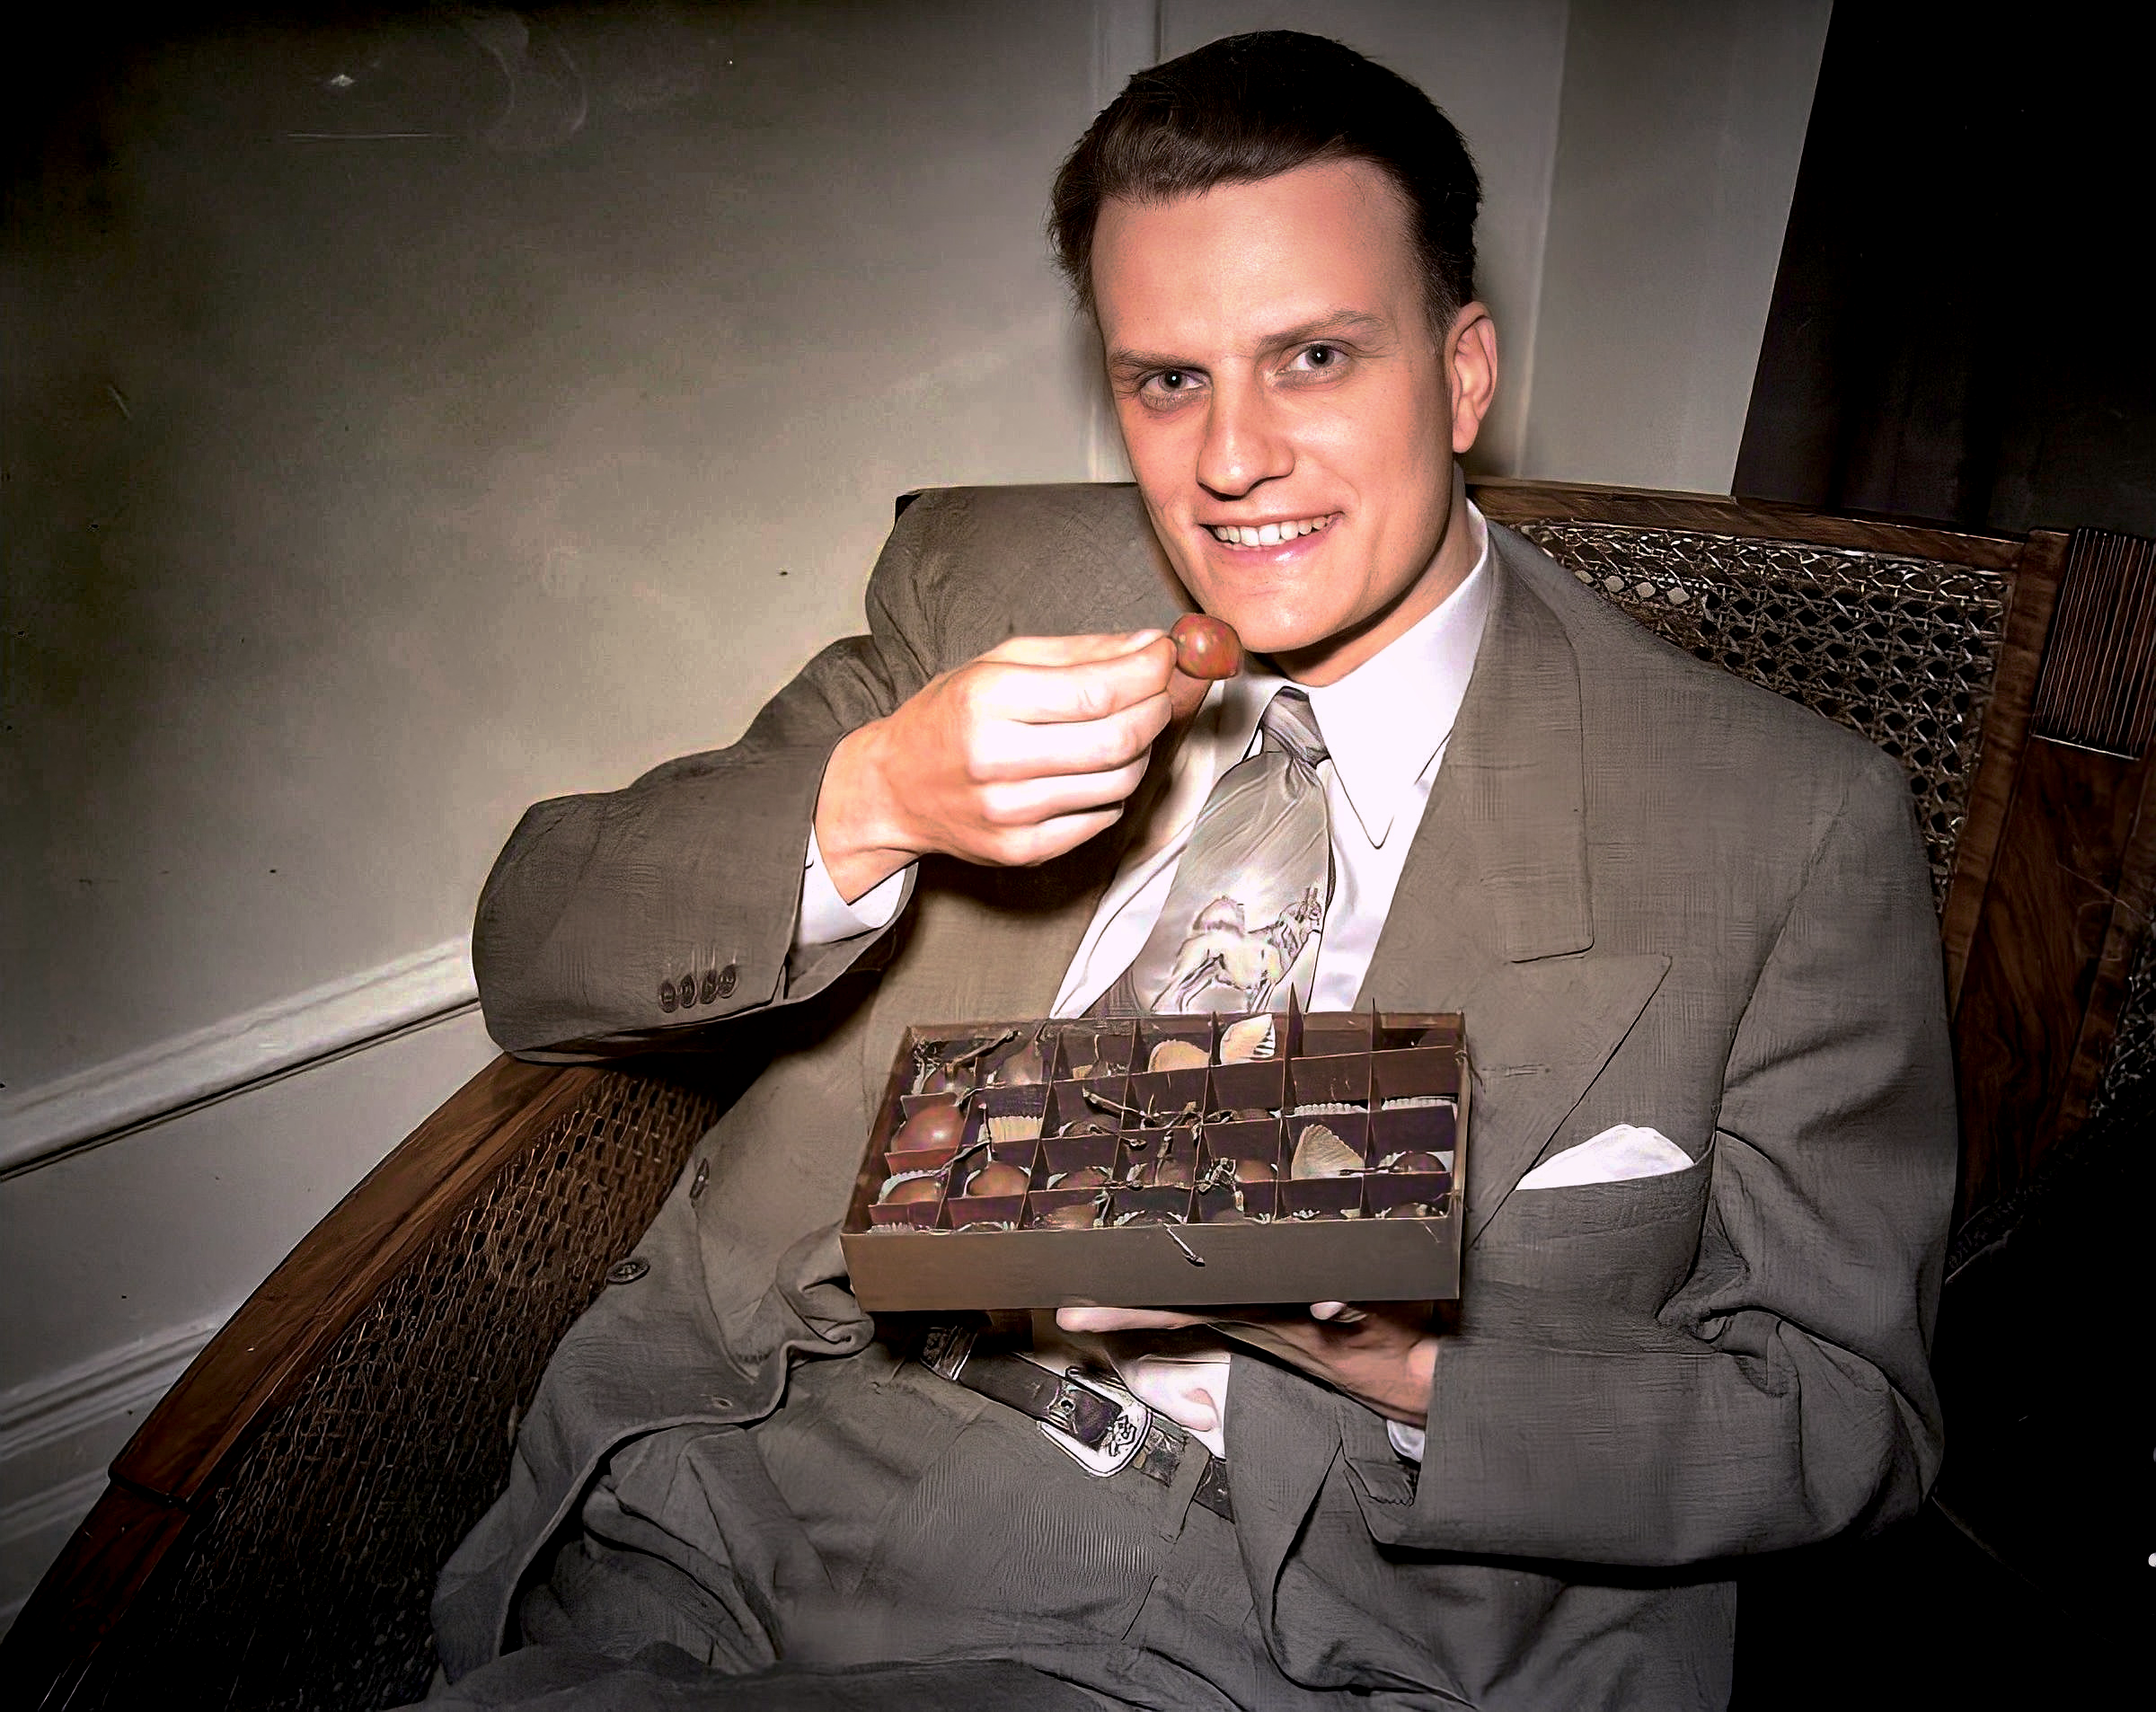 Did Billy Graham have sex with prostitutes? by Jonathan Poletti Im Jonathan photo